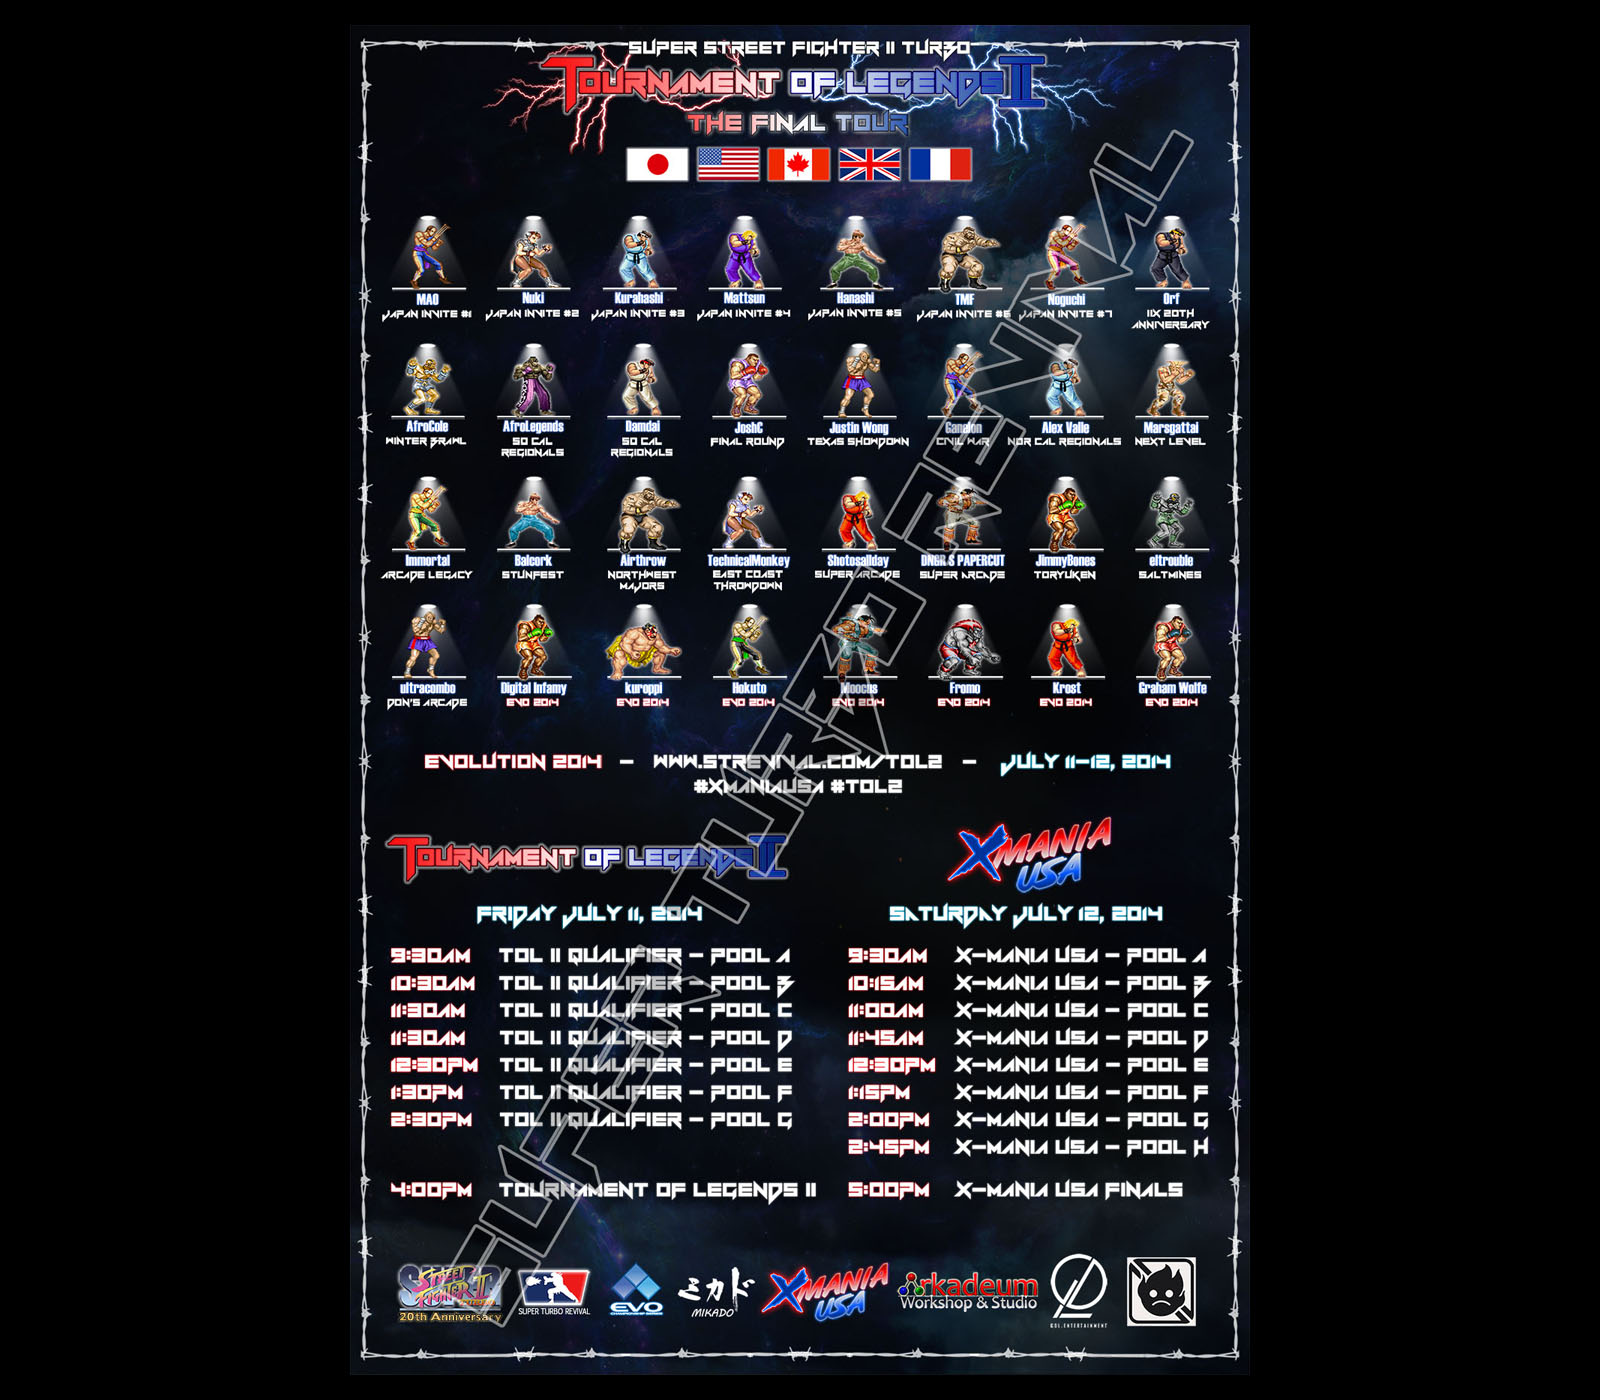 TOURNAMENT OF LEGENDS II poster. Signed posters were used to fundraise for tournament expenses.